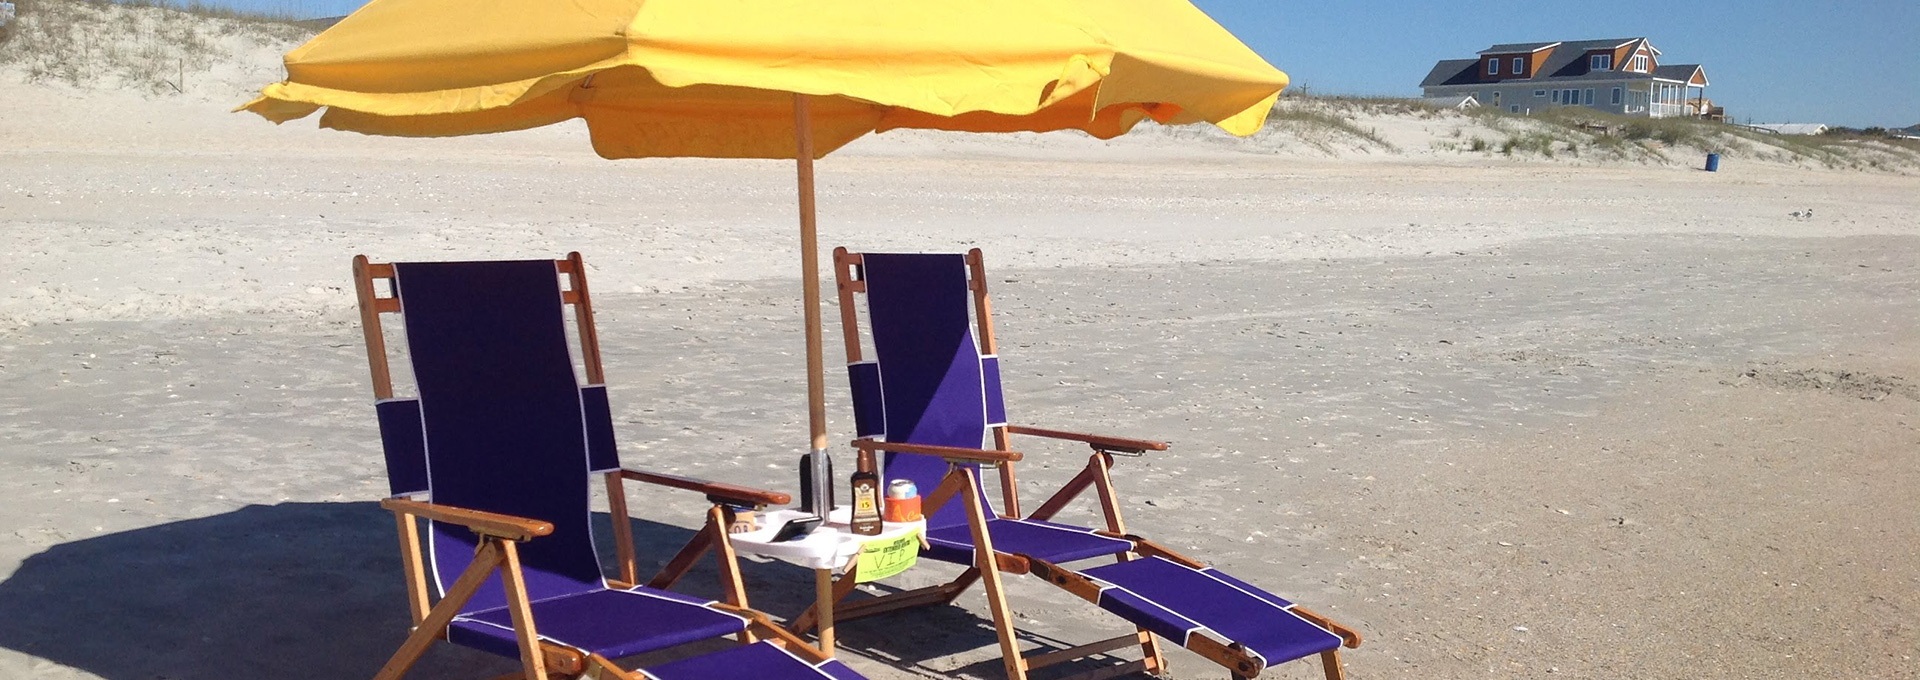 New Beach Chair Rentals Wilmington Nc for Large Space